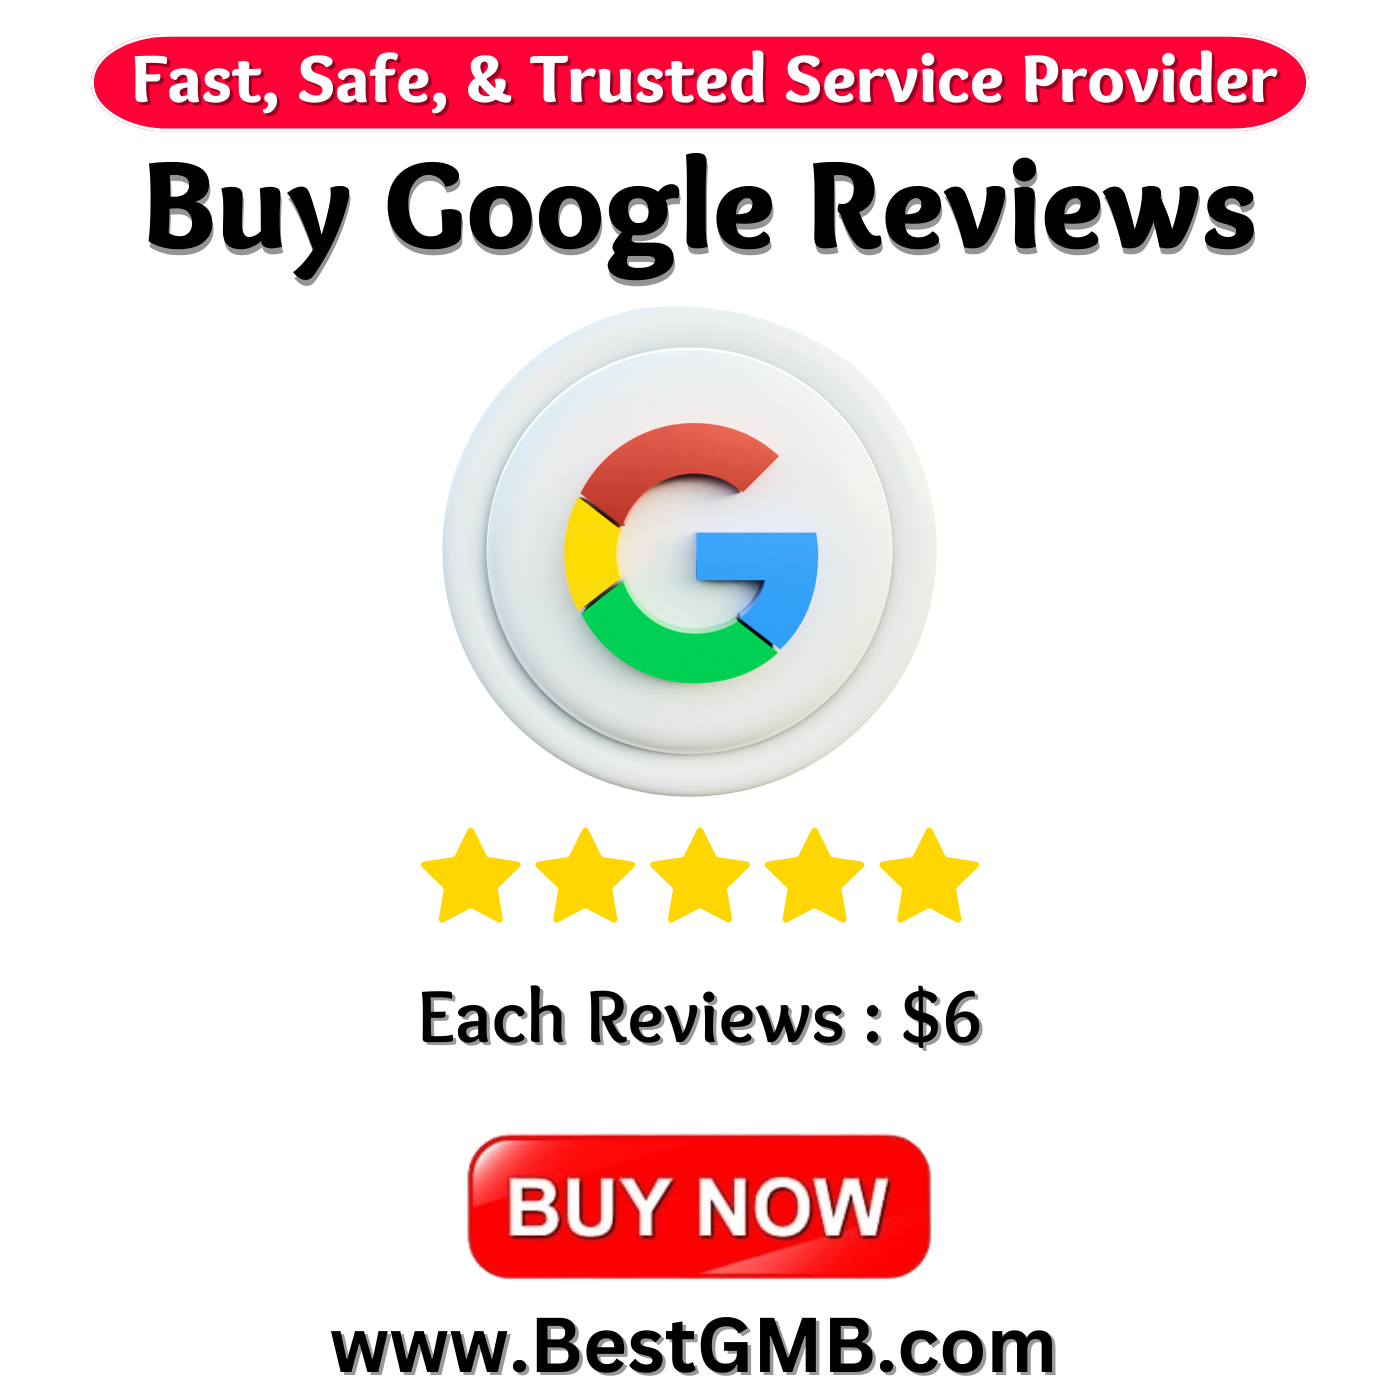 Buy Google Reviews - Fast , Safe & Trusted Service Provider